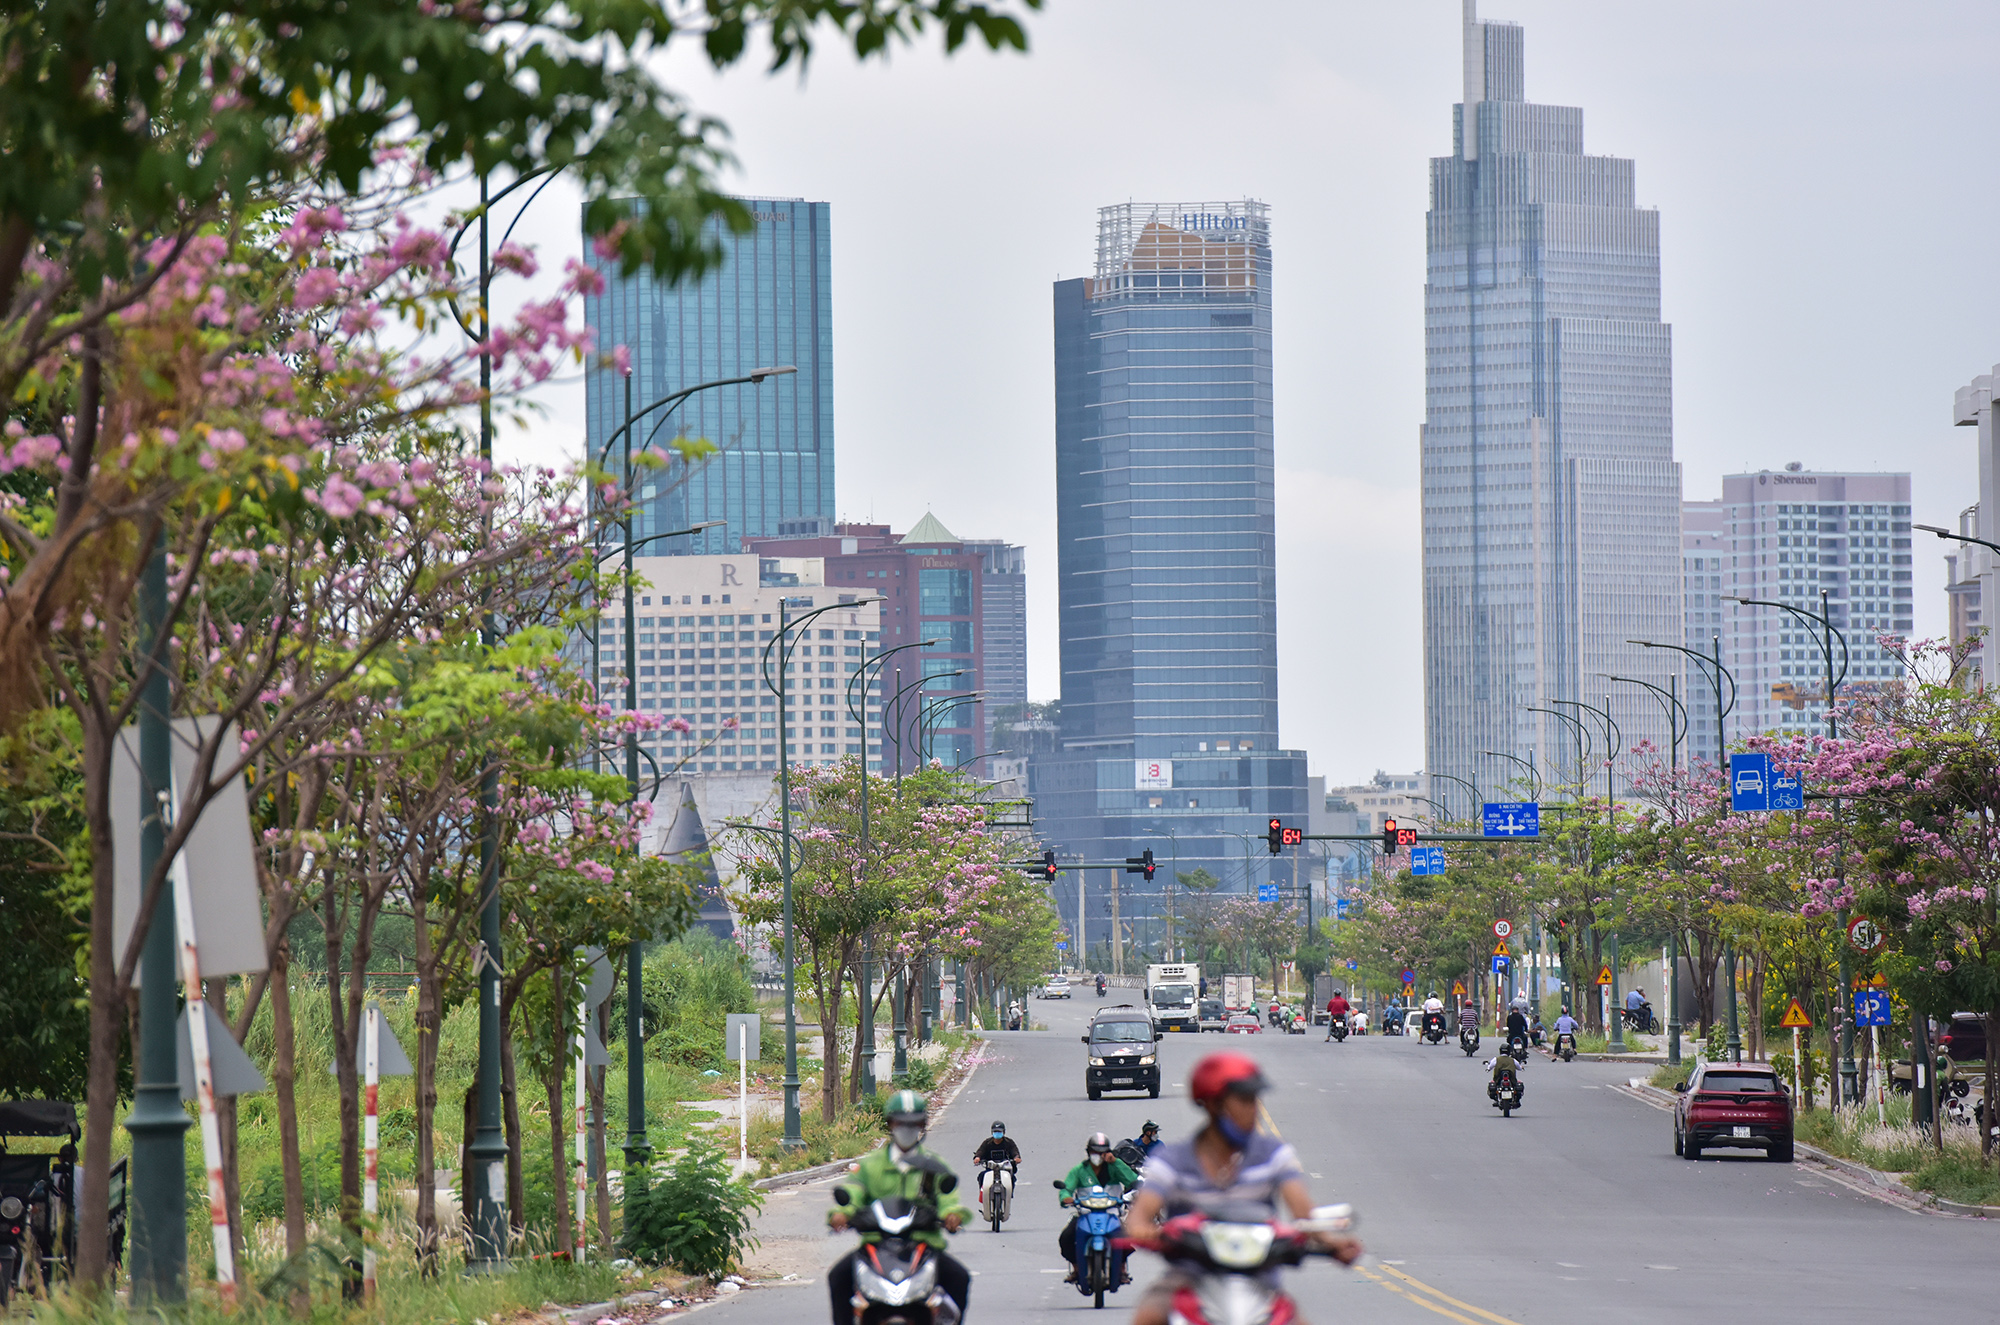 Be in awe of the picturesque sky of pink trumpets on the streets of Ho Chi Minh City - 17